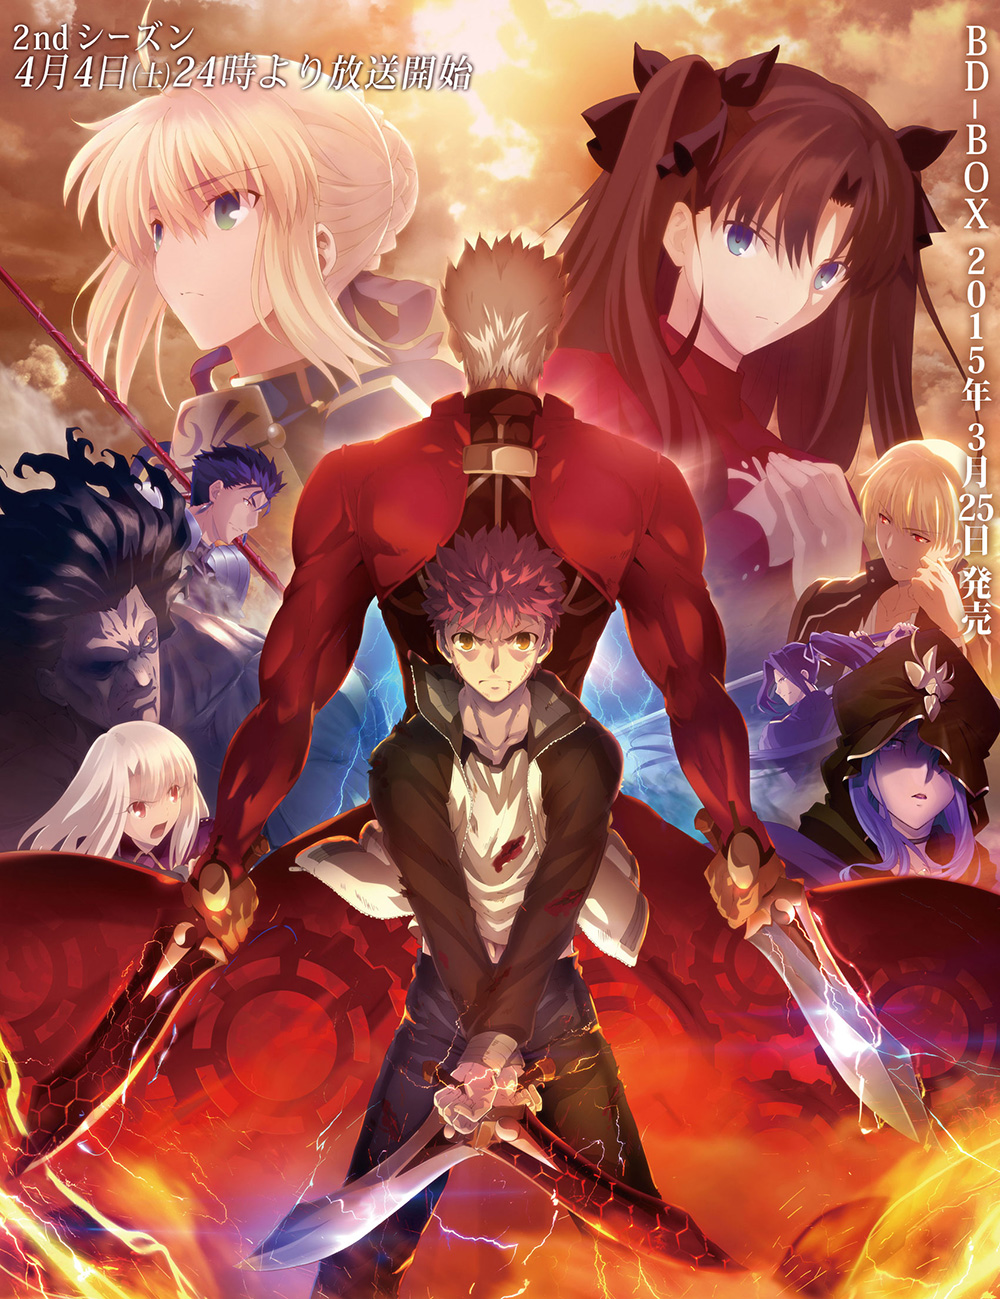 Fate-stay-night-Unlimited-Blade-Works-2nd-Season-Visual